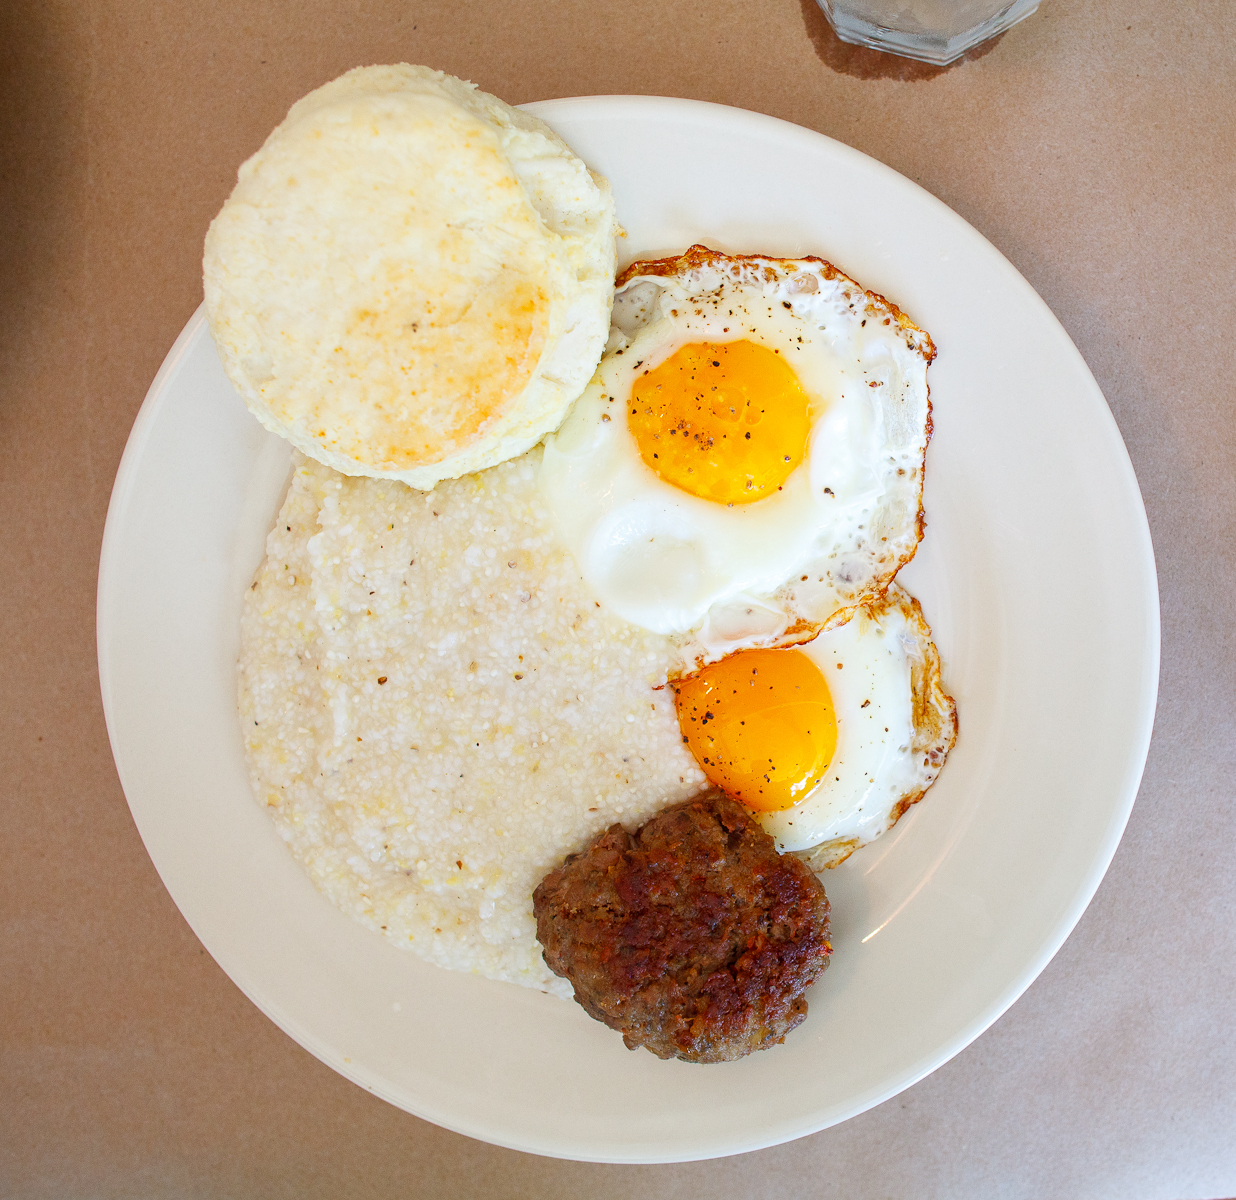 Two eggs sunny side up with Hominy grits and a biscuit ($7)